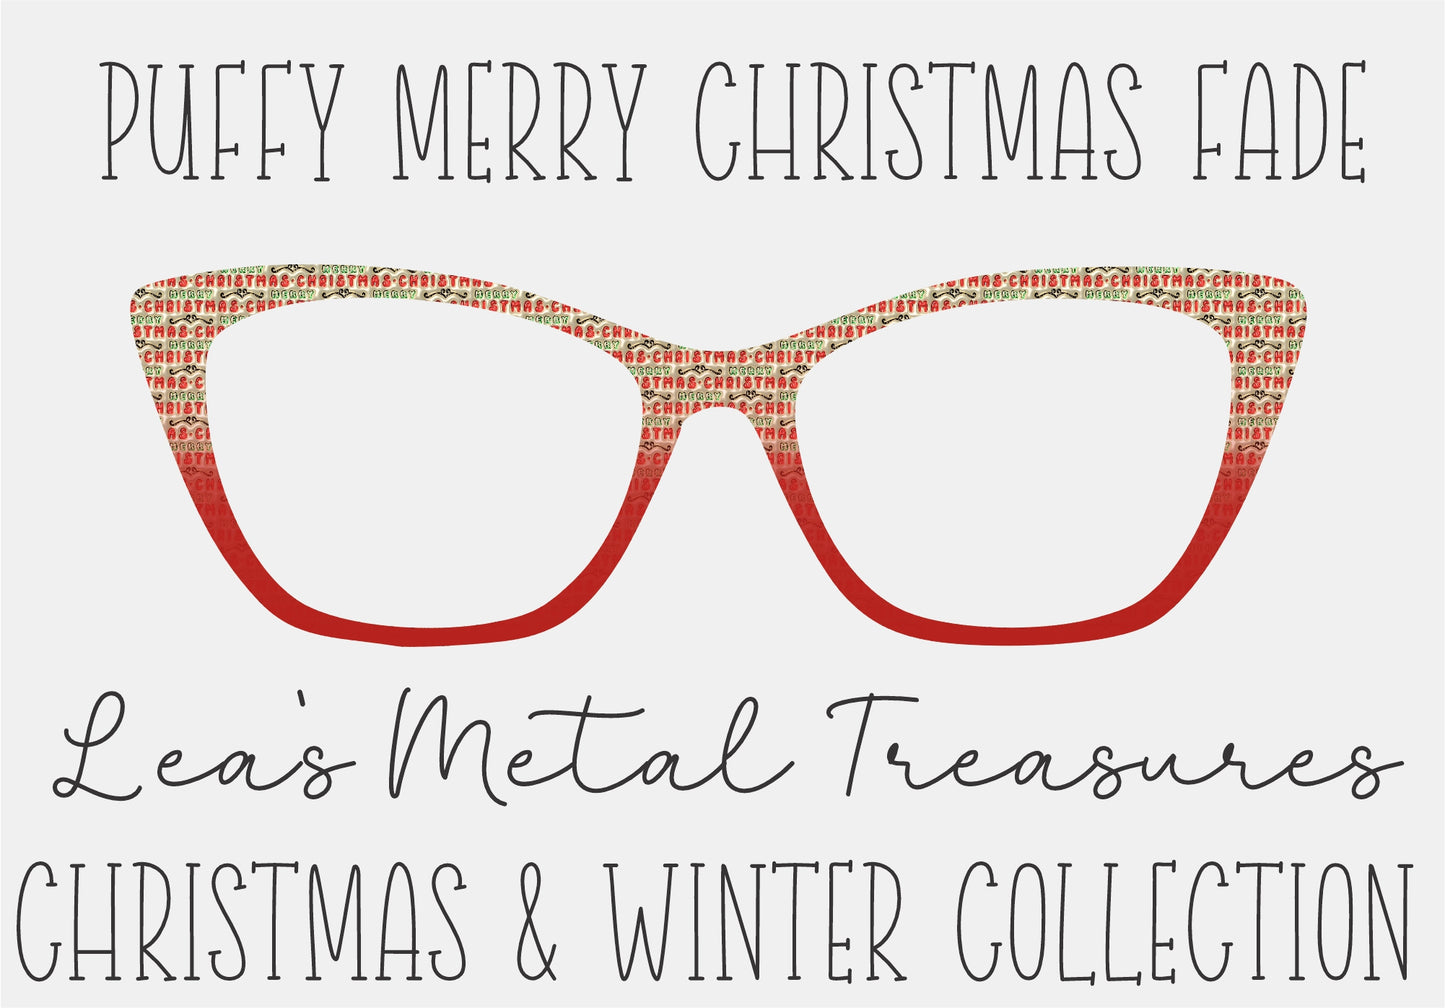 PUFFY MERRY CHRISTMAS FADE Eyewear Frame Toppers COMES WITH MAGNETS